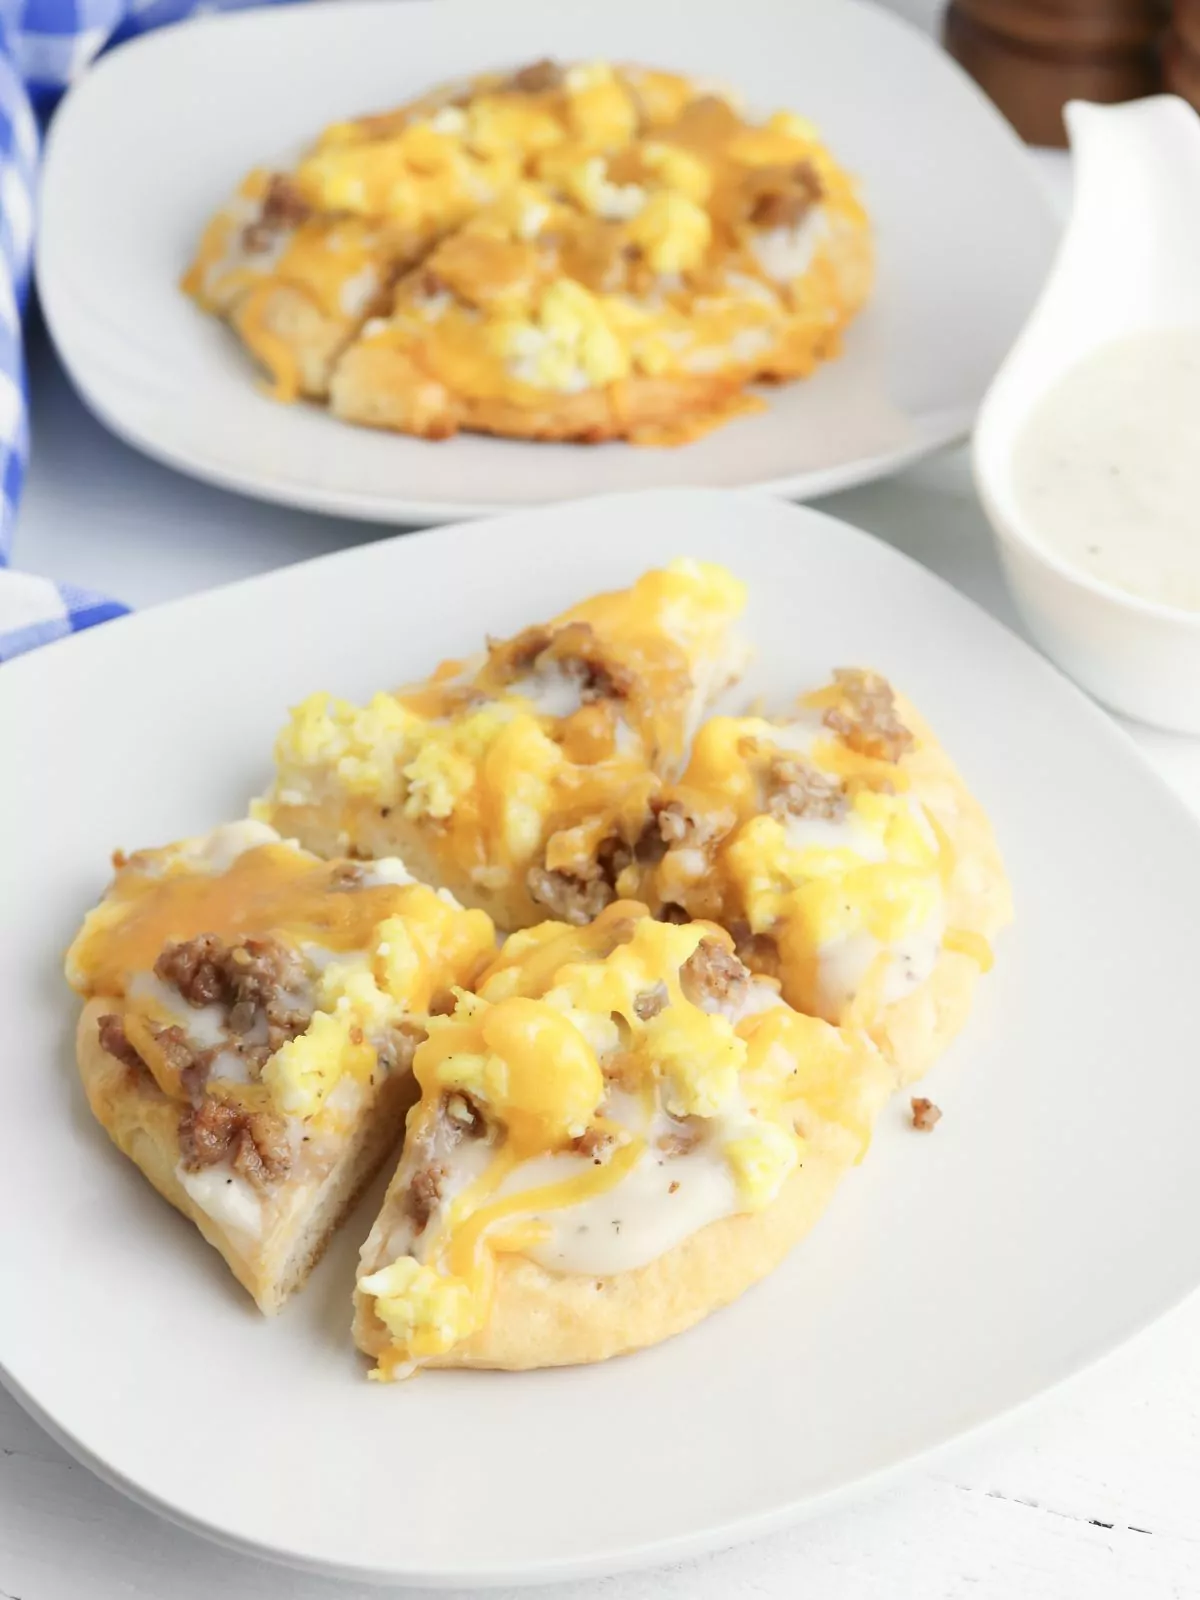 Breakfast Pizza Rolls cut into quarters and served on a white plate